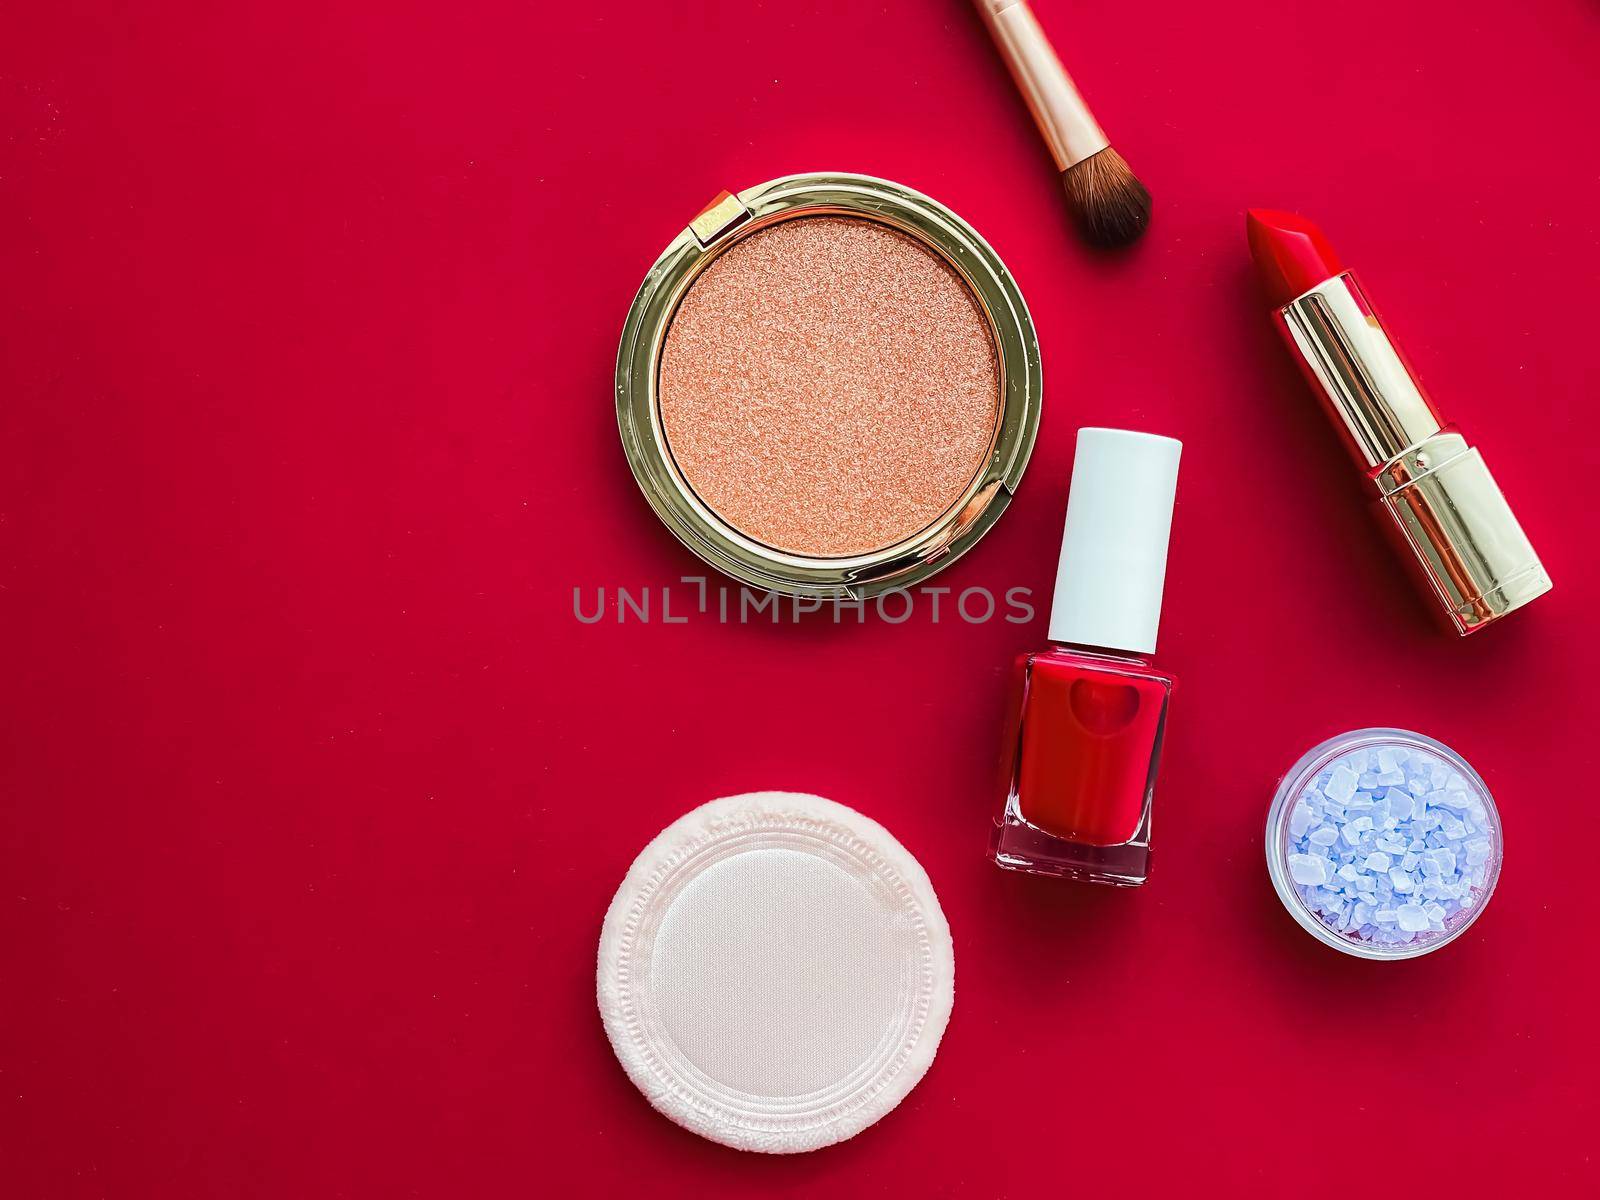 Beauty, make-up and cosmetics flatlay design with copyspace, cosmetic products and makeup tools on red background, girly and feminine style by Anneleven